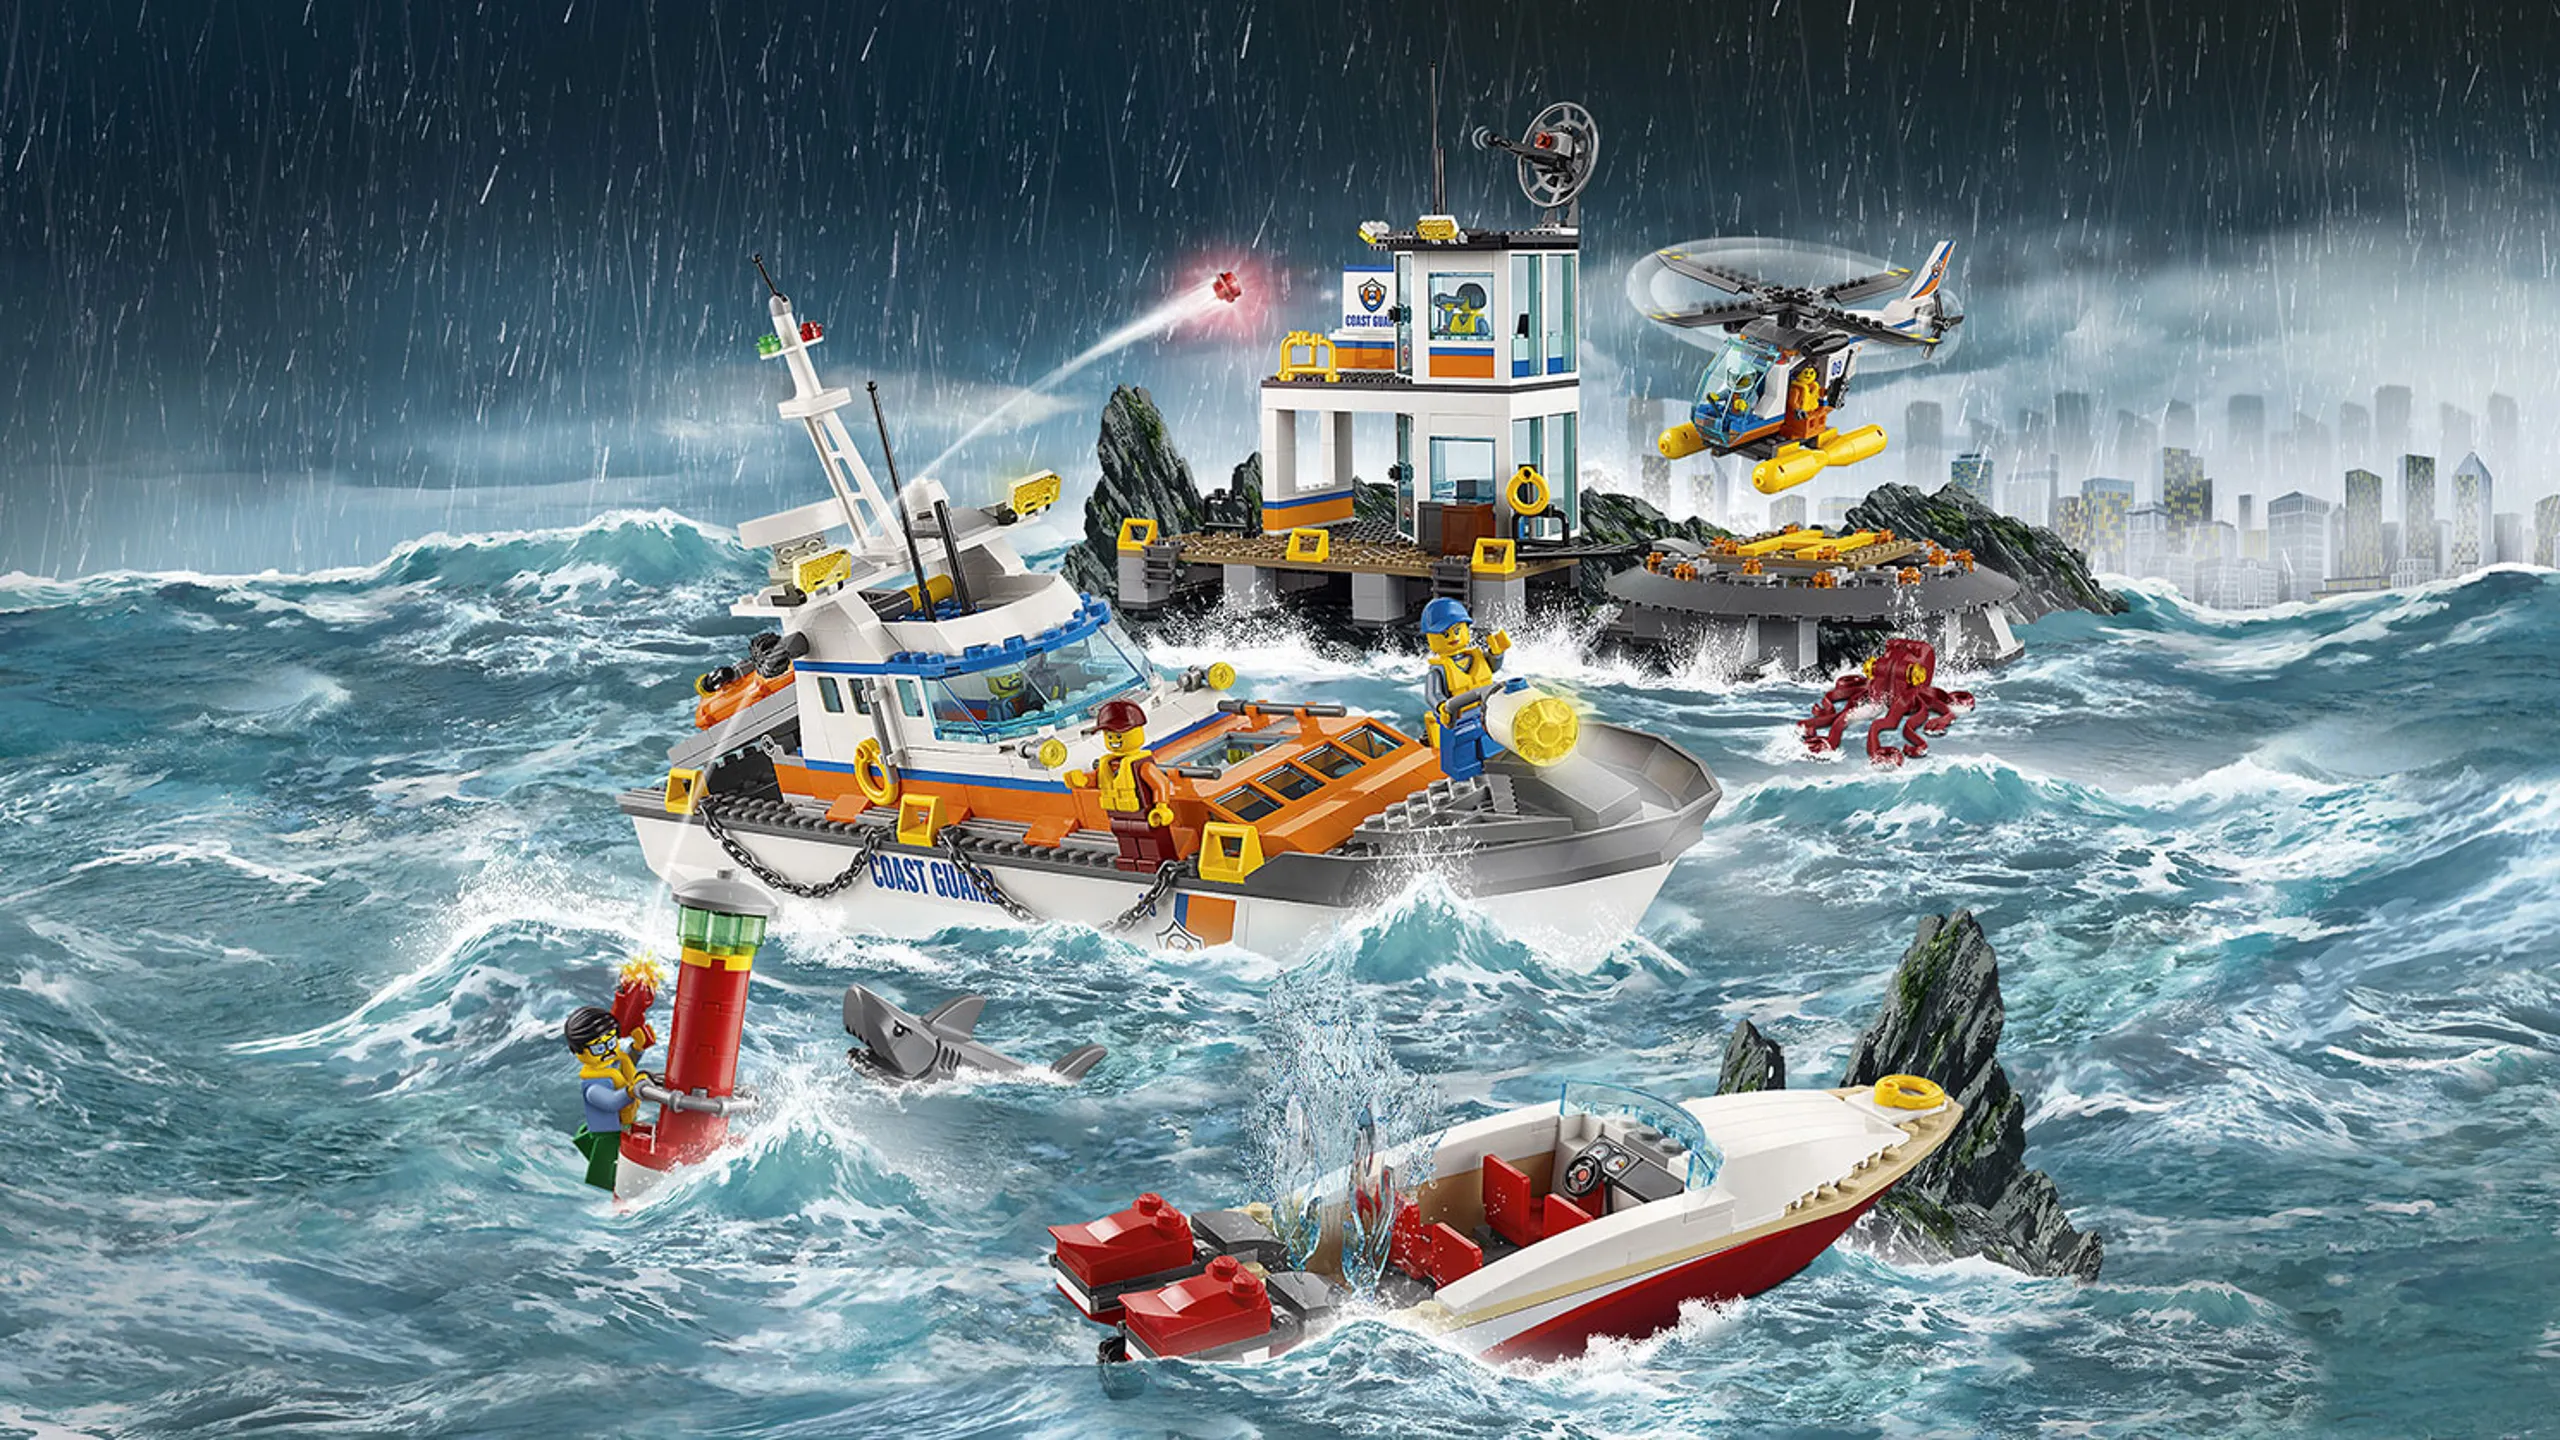 LEGO City Coast Guard - 60167 Coast Guard Head Quarters - Sharks, cliffs and an octopus causes chaos at sea and it is the coast guard's job to restore order.